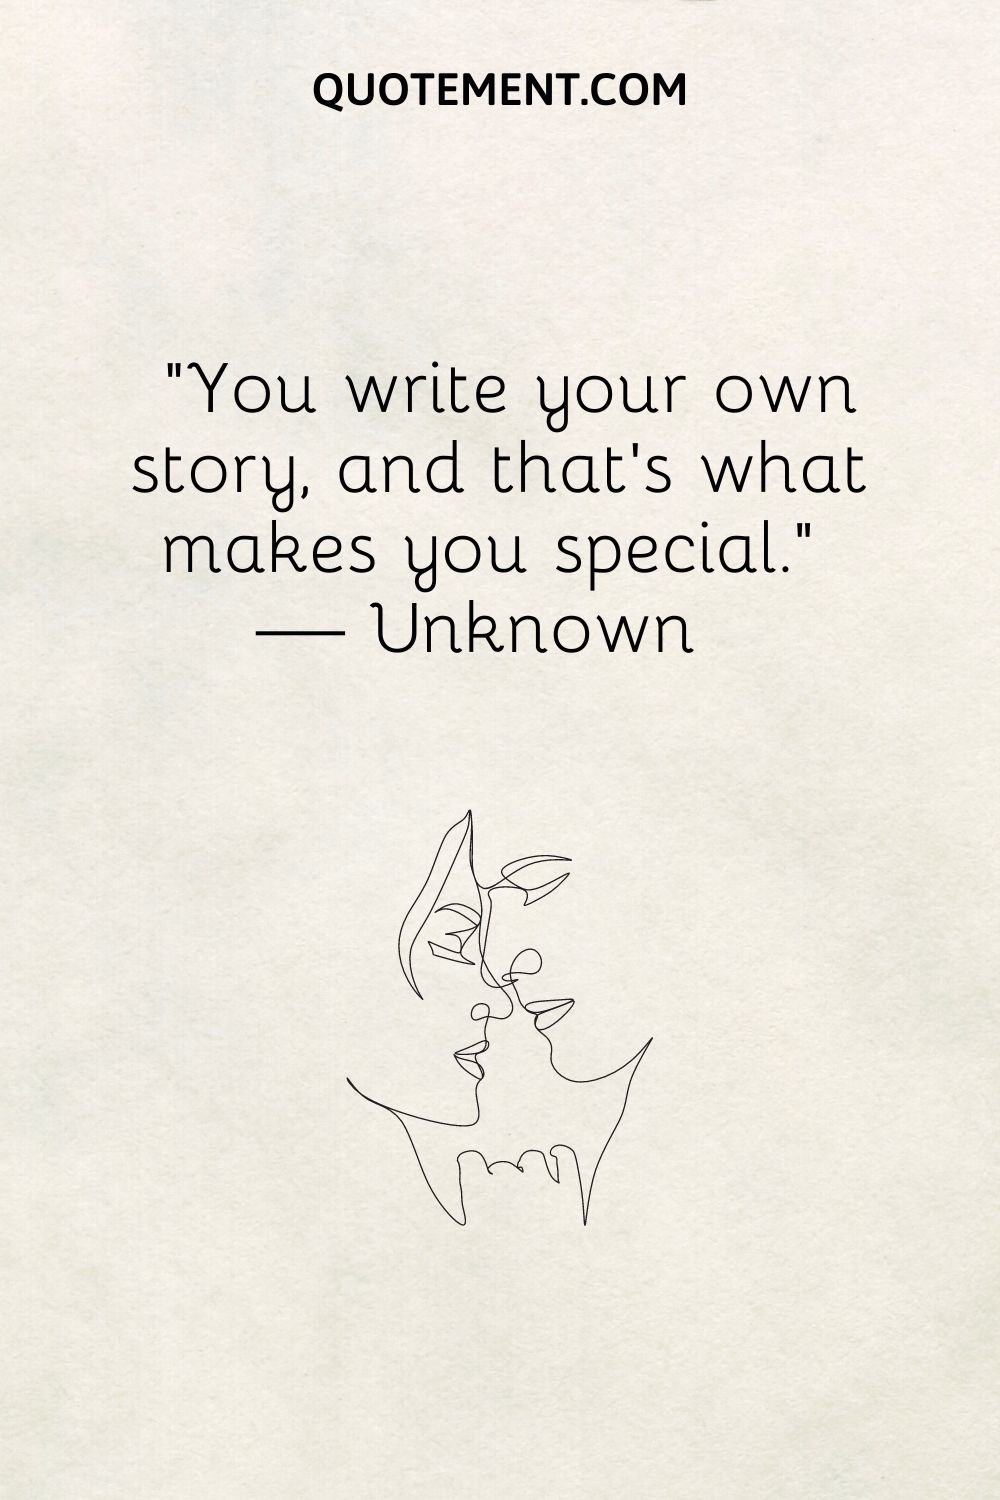 “You write your own story, and that’s what makes you special